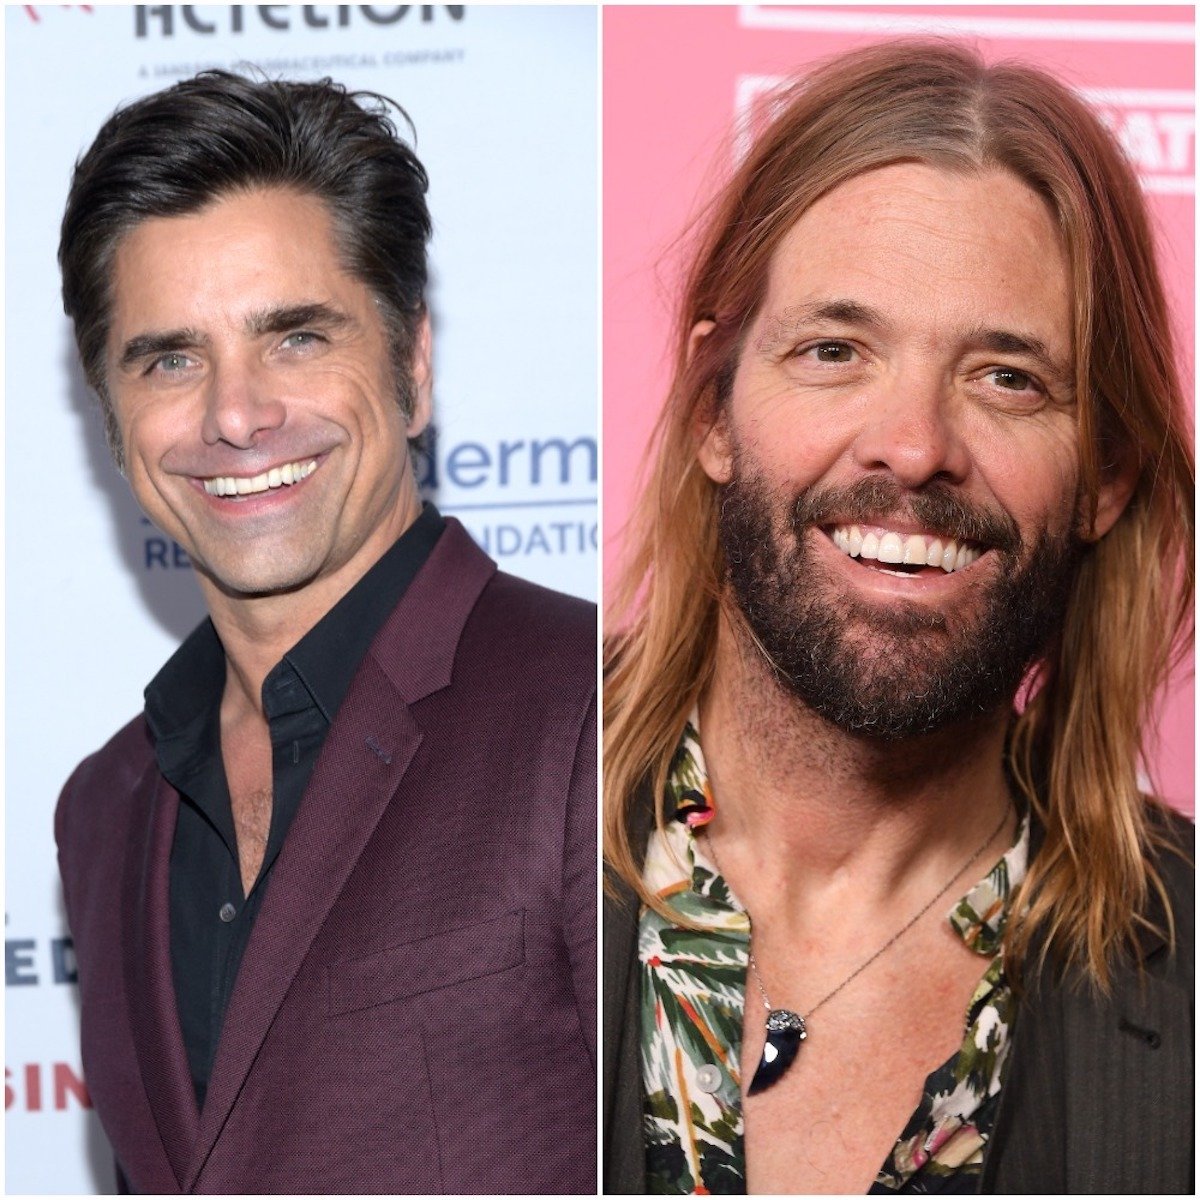 A photo of John Stamos next to photo of Taylor Hawkins.